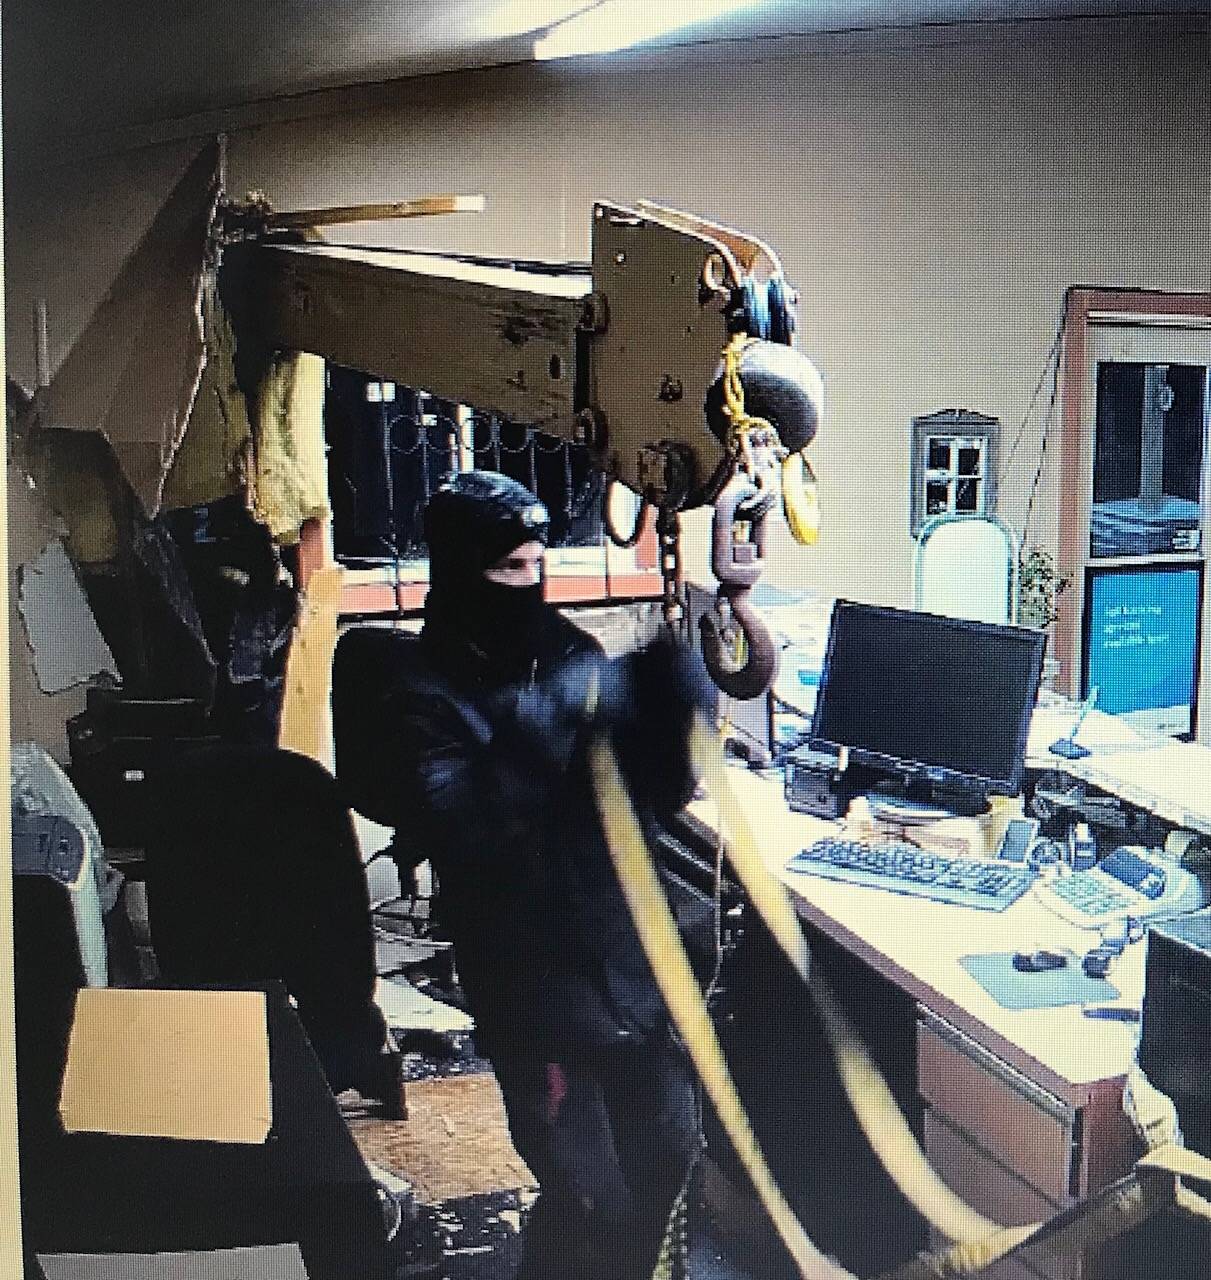 Suspects break into Winfield bank with picker truck and steal safe